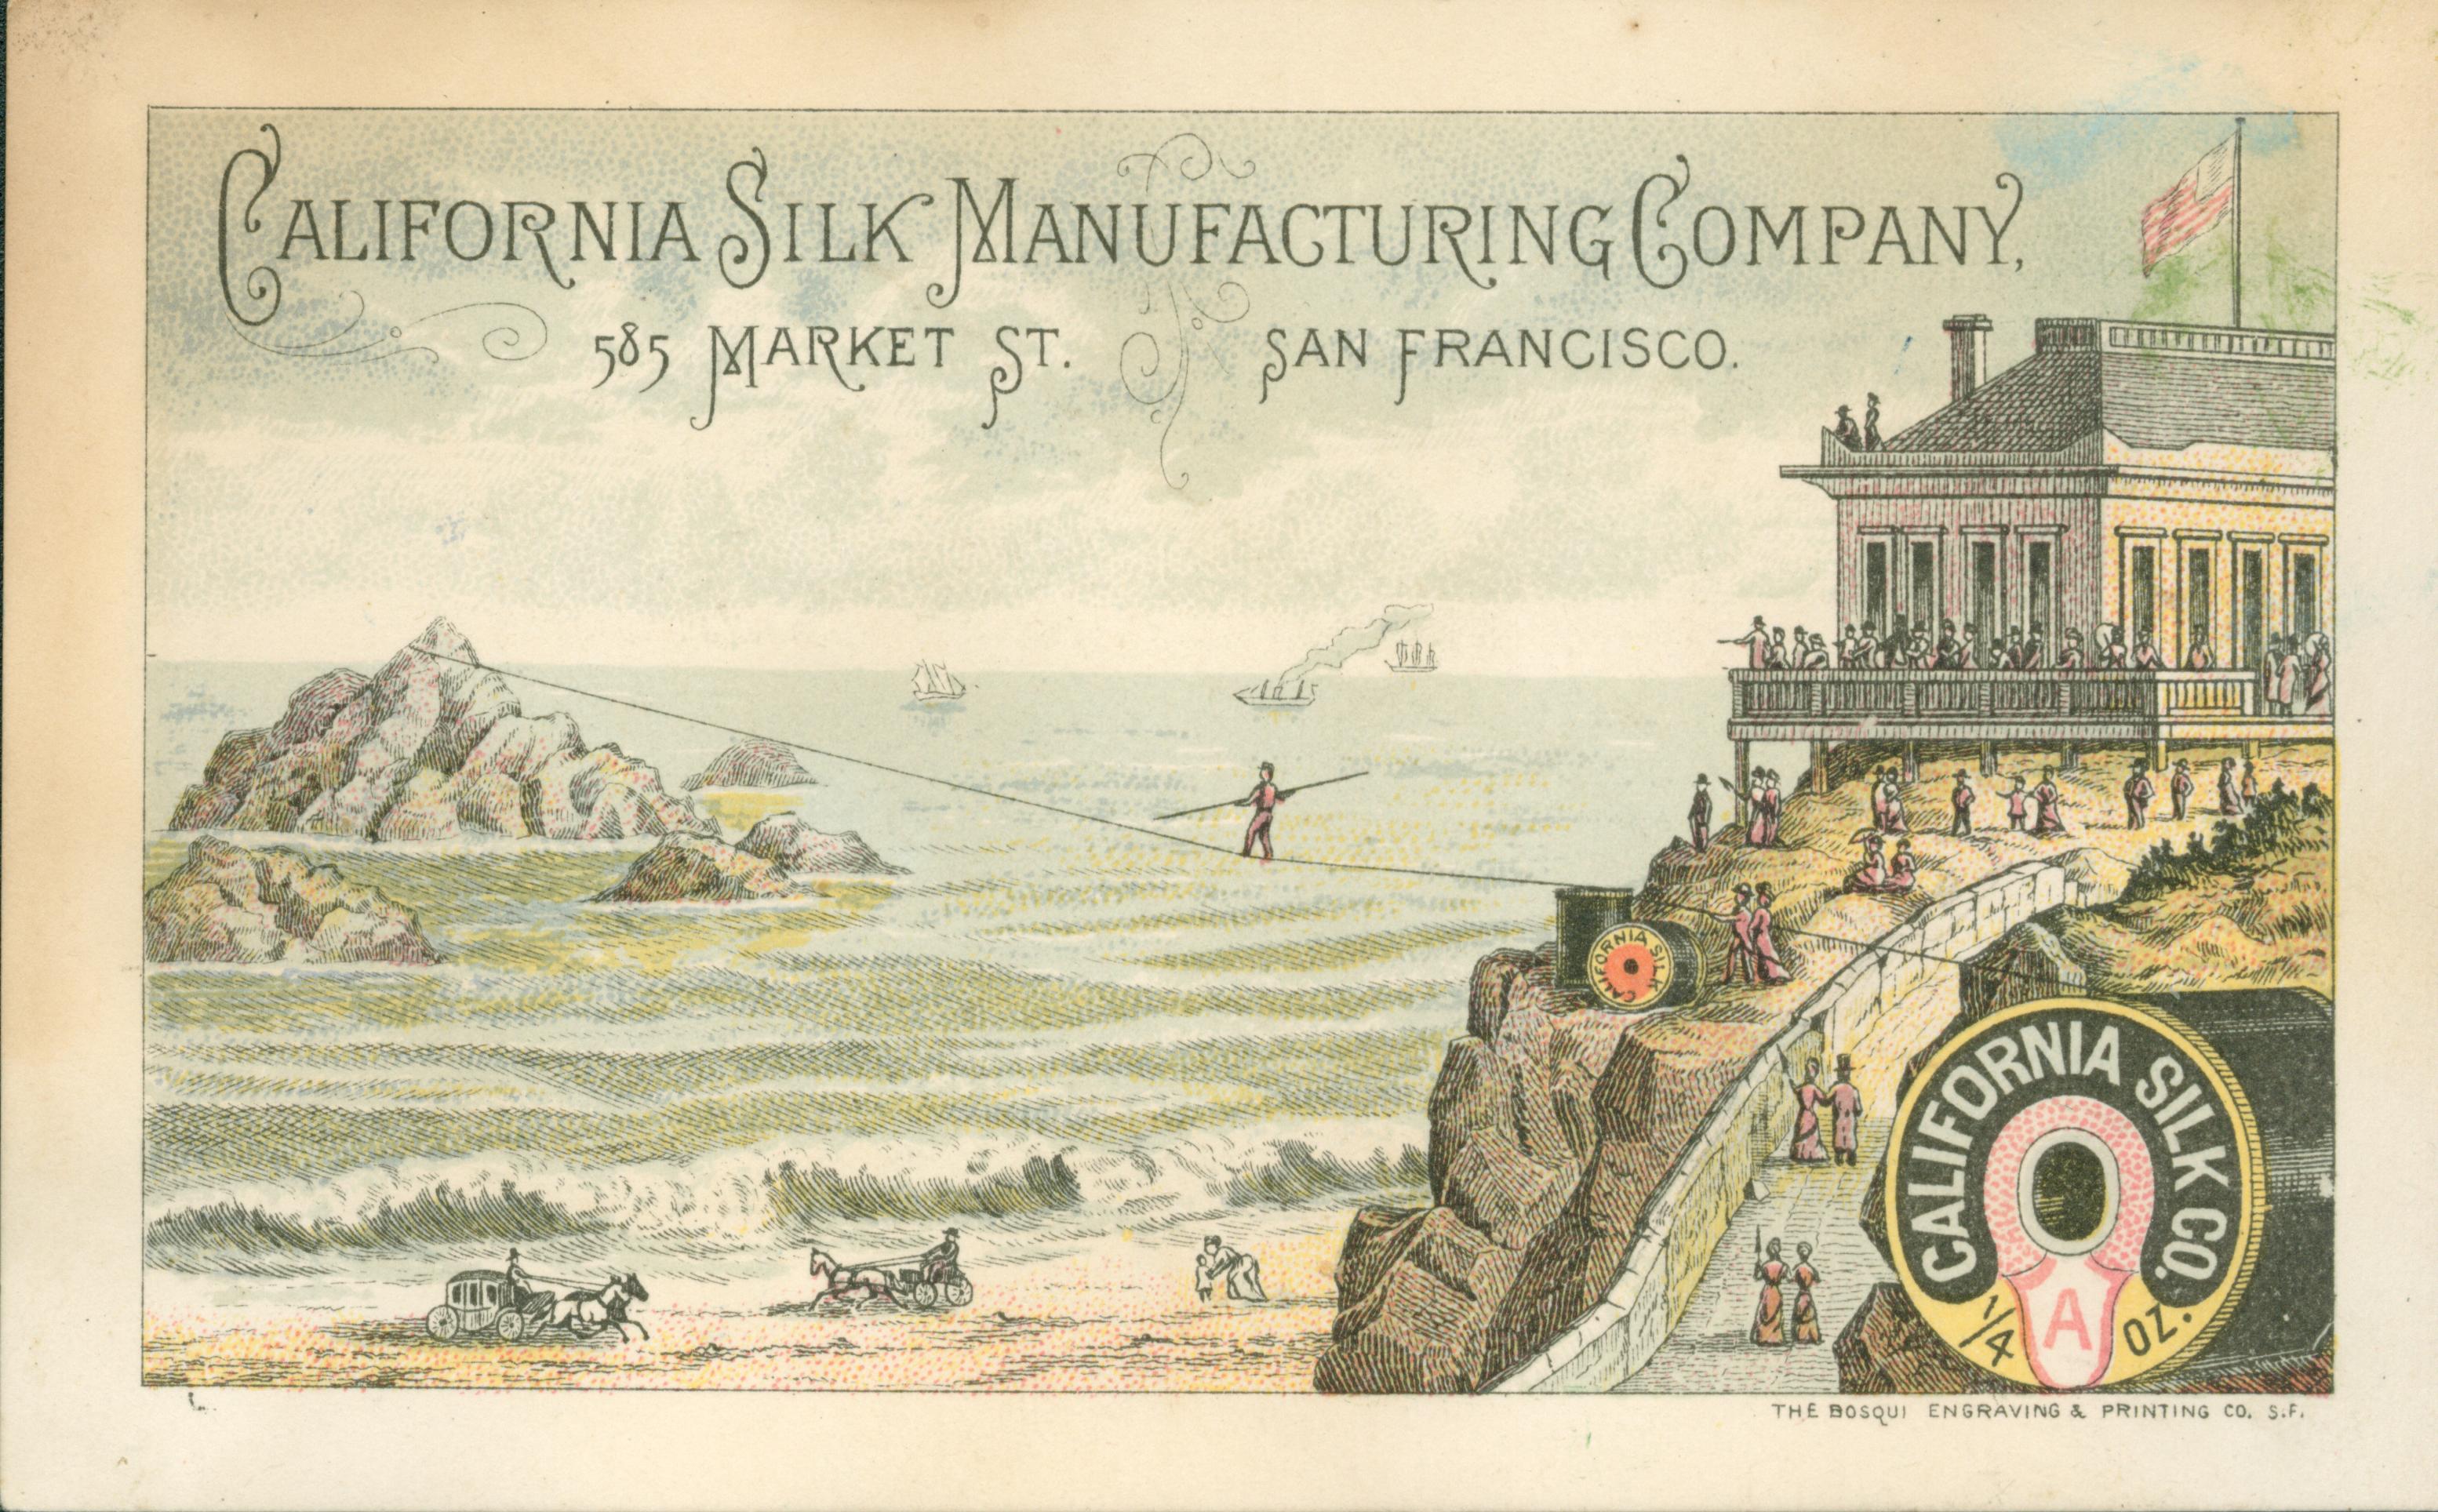 This trade card, shows a man walking on a tightrope made of a spool of California Silk, from the beach near the Cliff House out to Seal Rock.